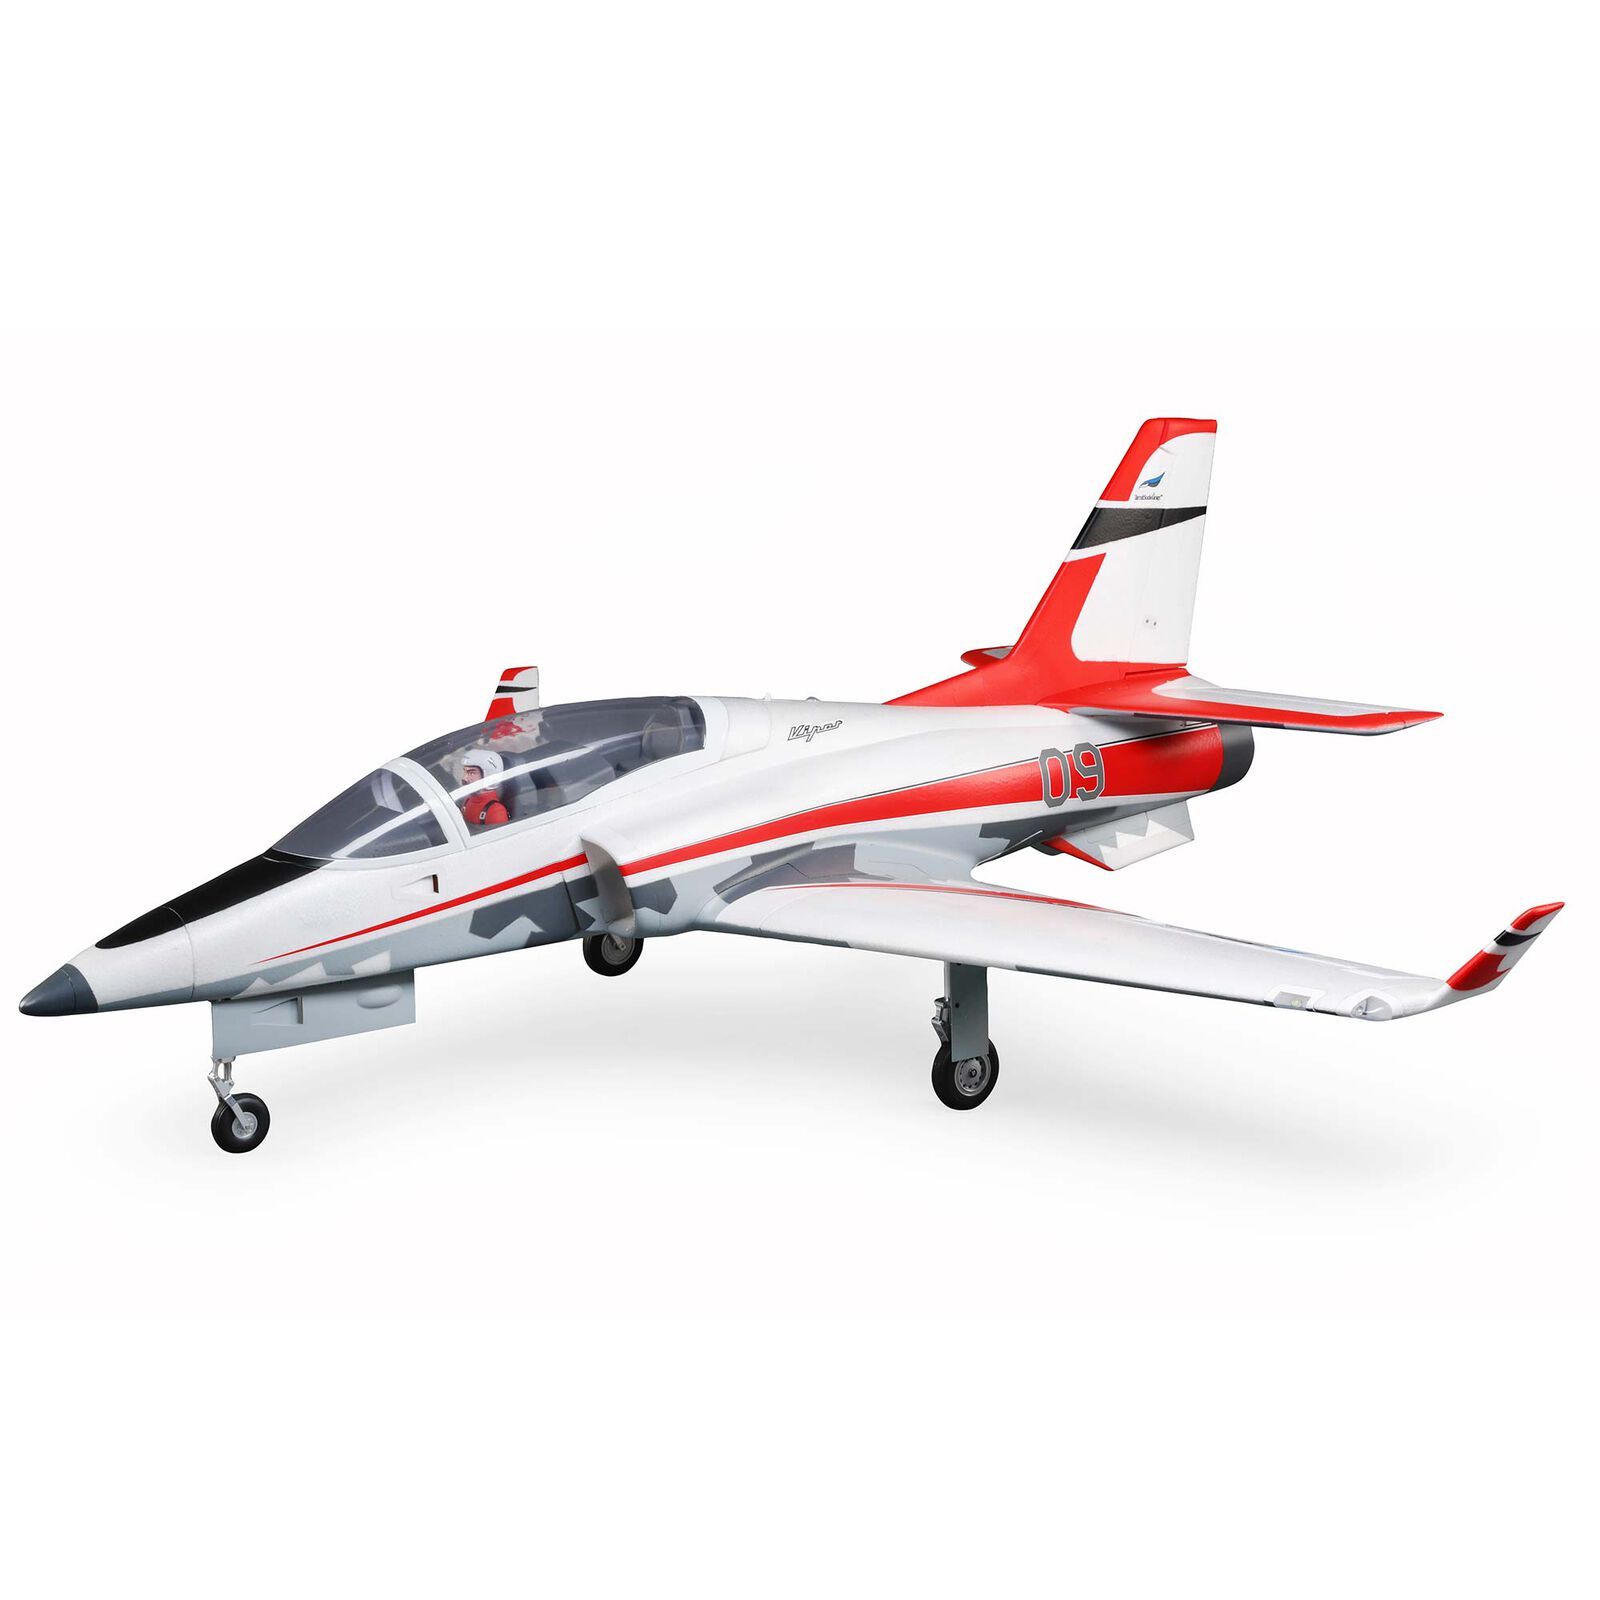 E-Flite Viper 90mm EDF Jet BNF Basic met AS3X & SAFE Select systeem